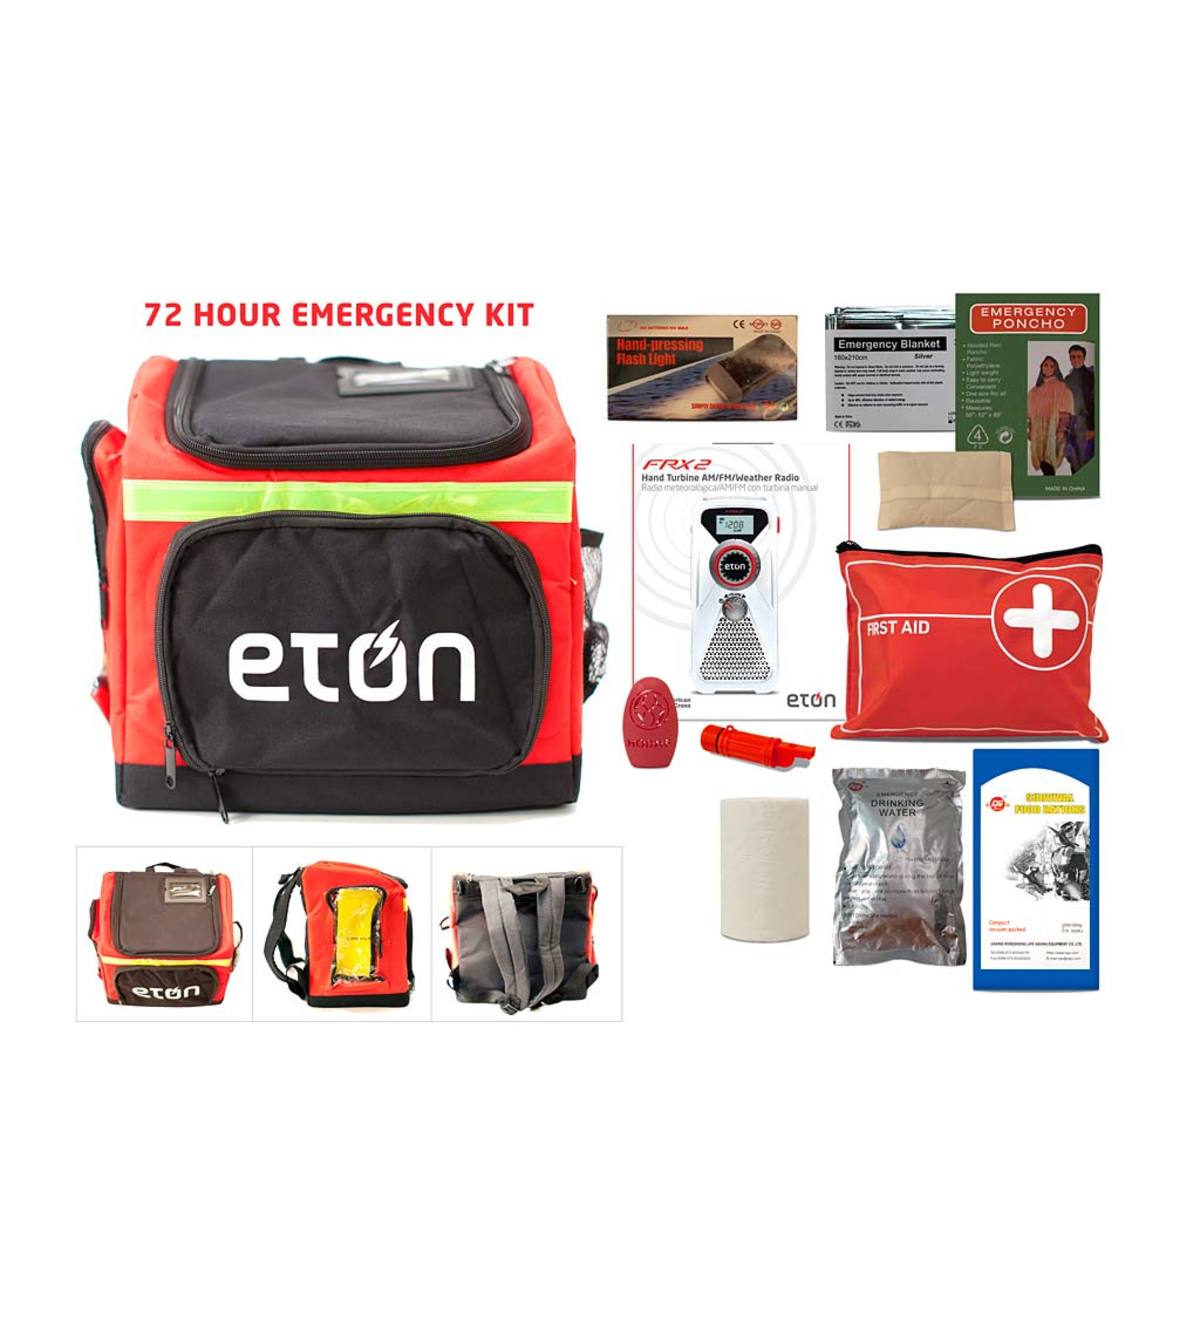 3-Day Emergency Kit with Multi-Function Radio, Food Ration, First-Aid Kit, and More in Convenient Carry Case